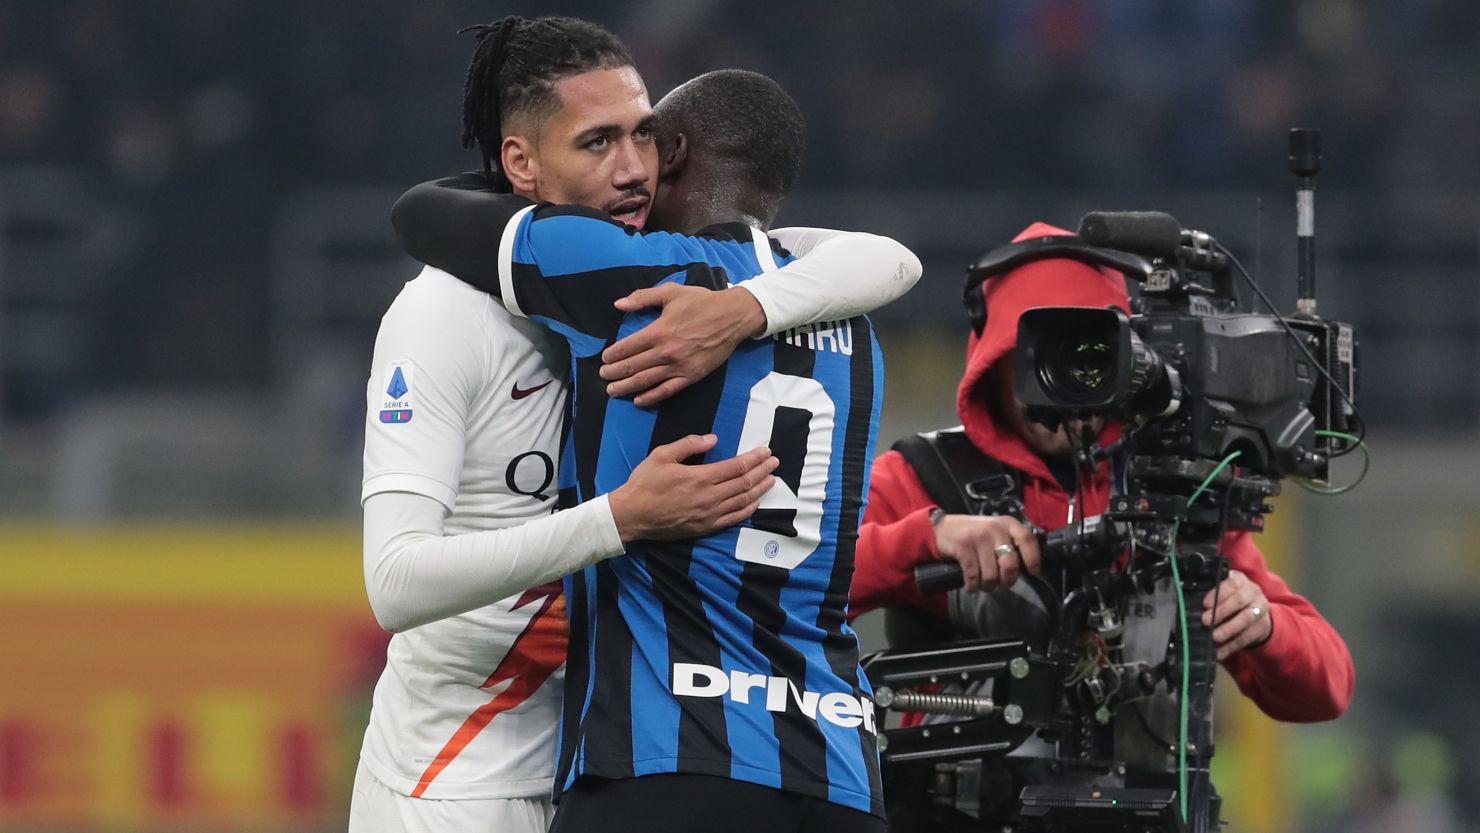 Smalling (left) and Lukaku (right) embrace ahead of Friday's Serie A game in Milan.